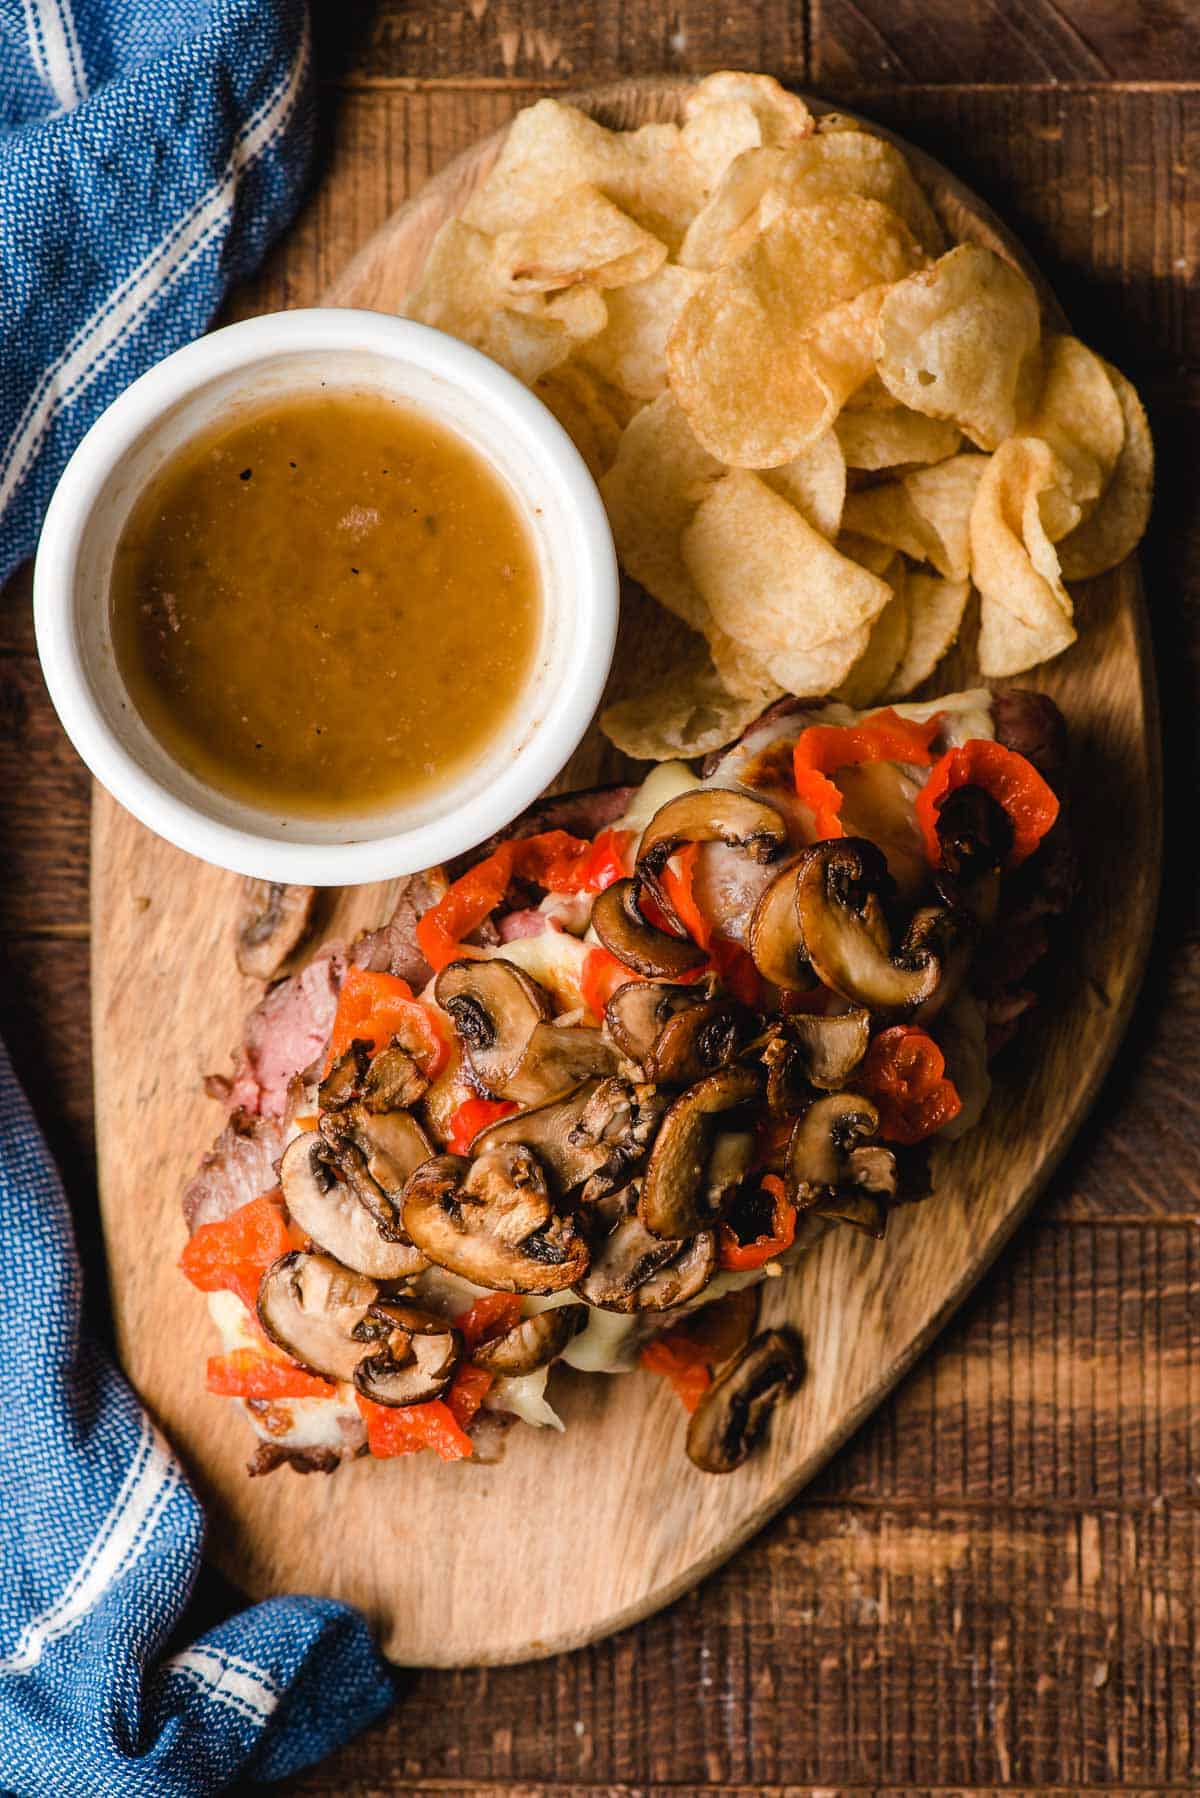 French dip prime rib sandwich on a cutting board with au jus and chips.